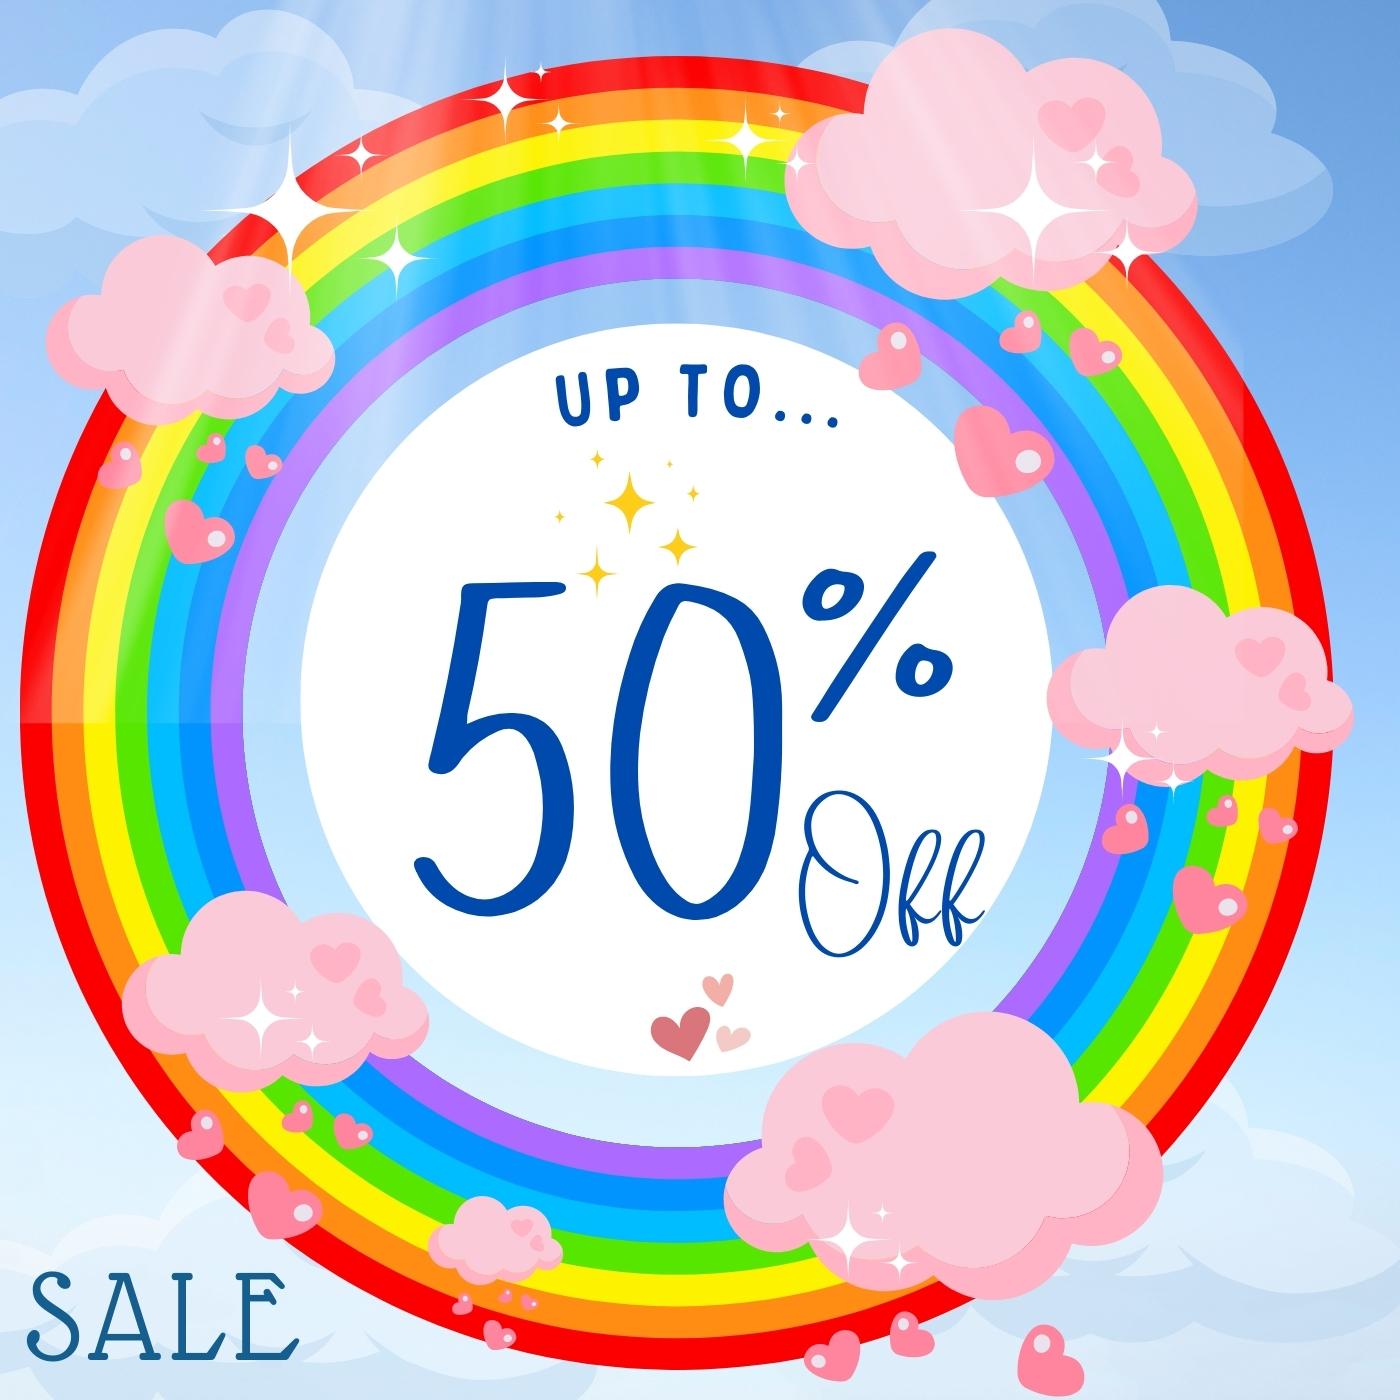 SALE - Up To 50% Off!